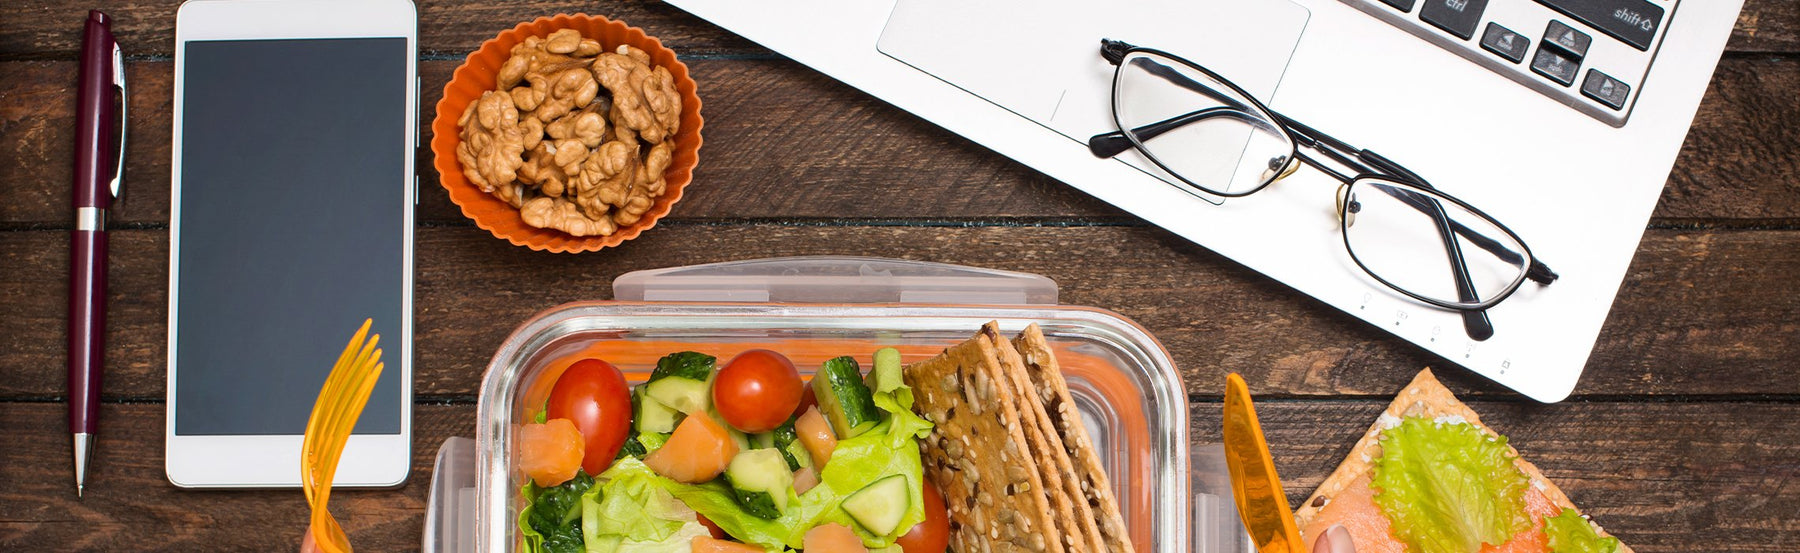 Nine Ways to Make Your Work Lunches Healthier